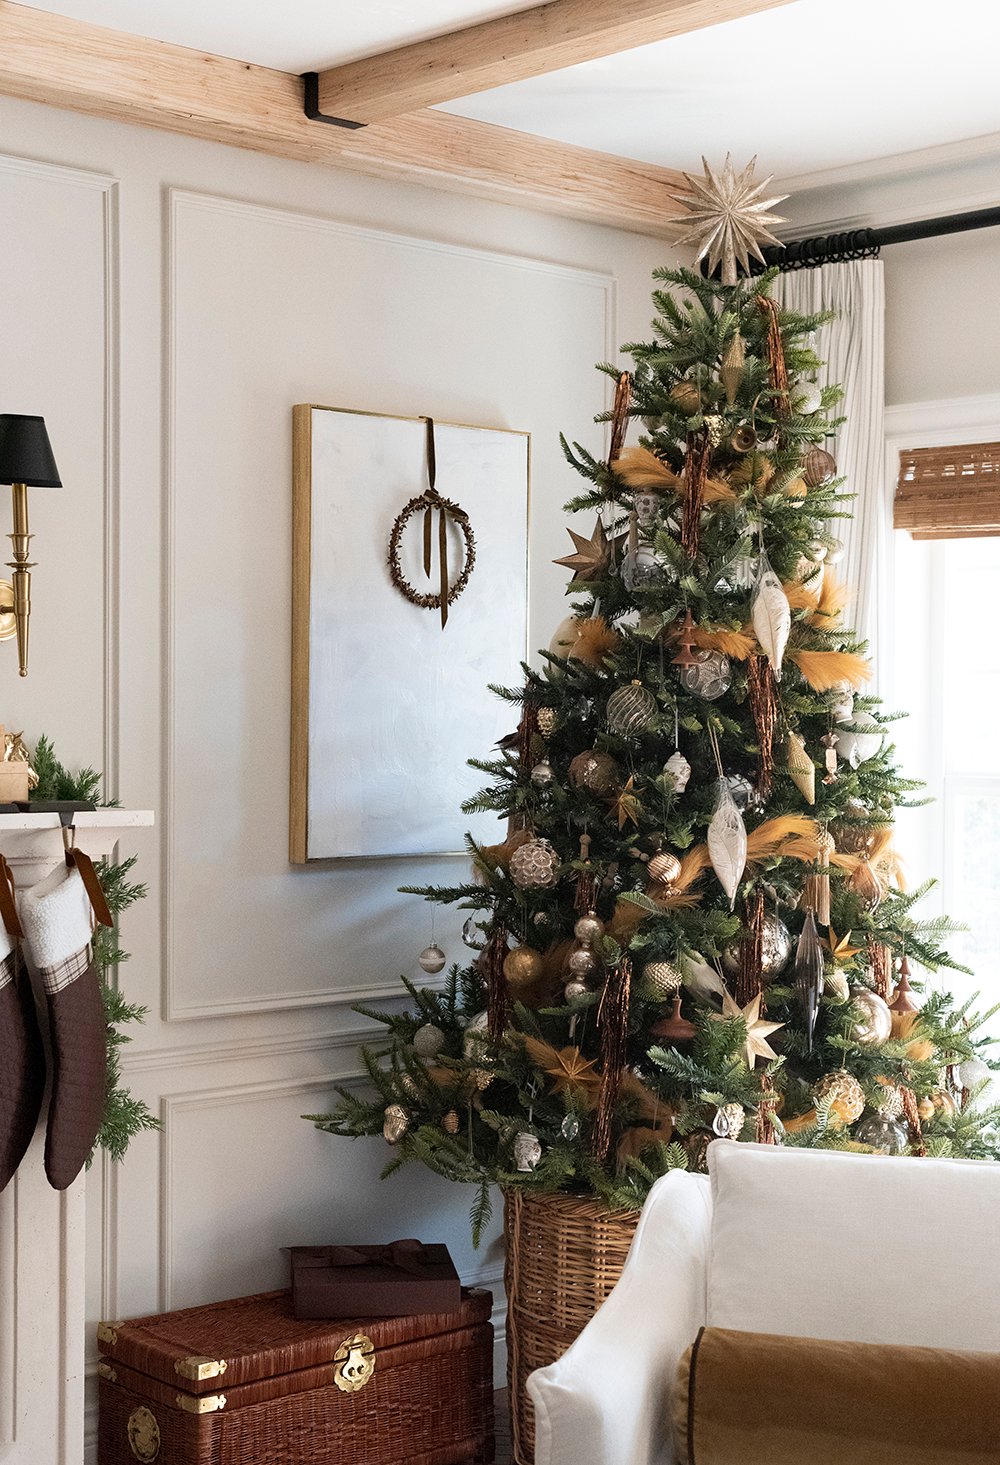 Equestrian Inspired Christmas Tour : The Tree - roomfortuesday.com